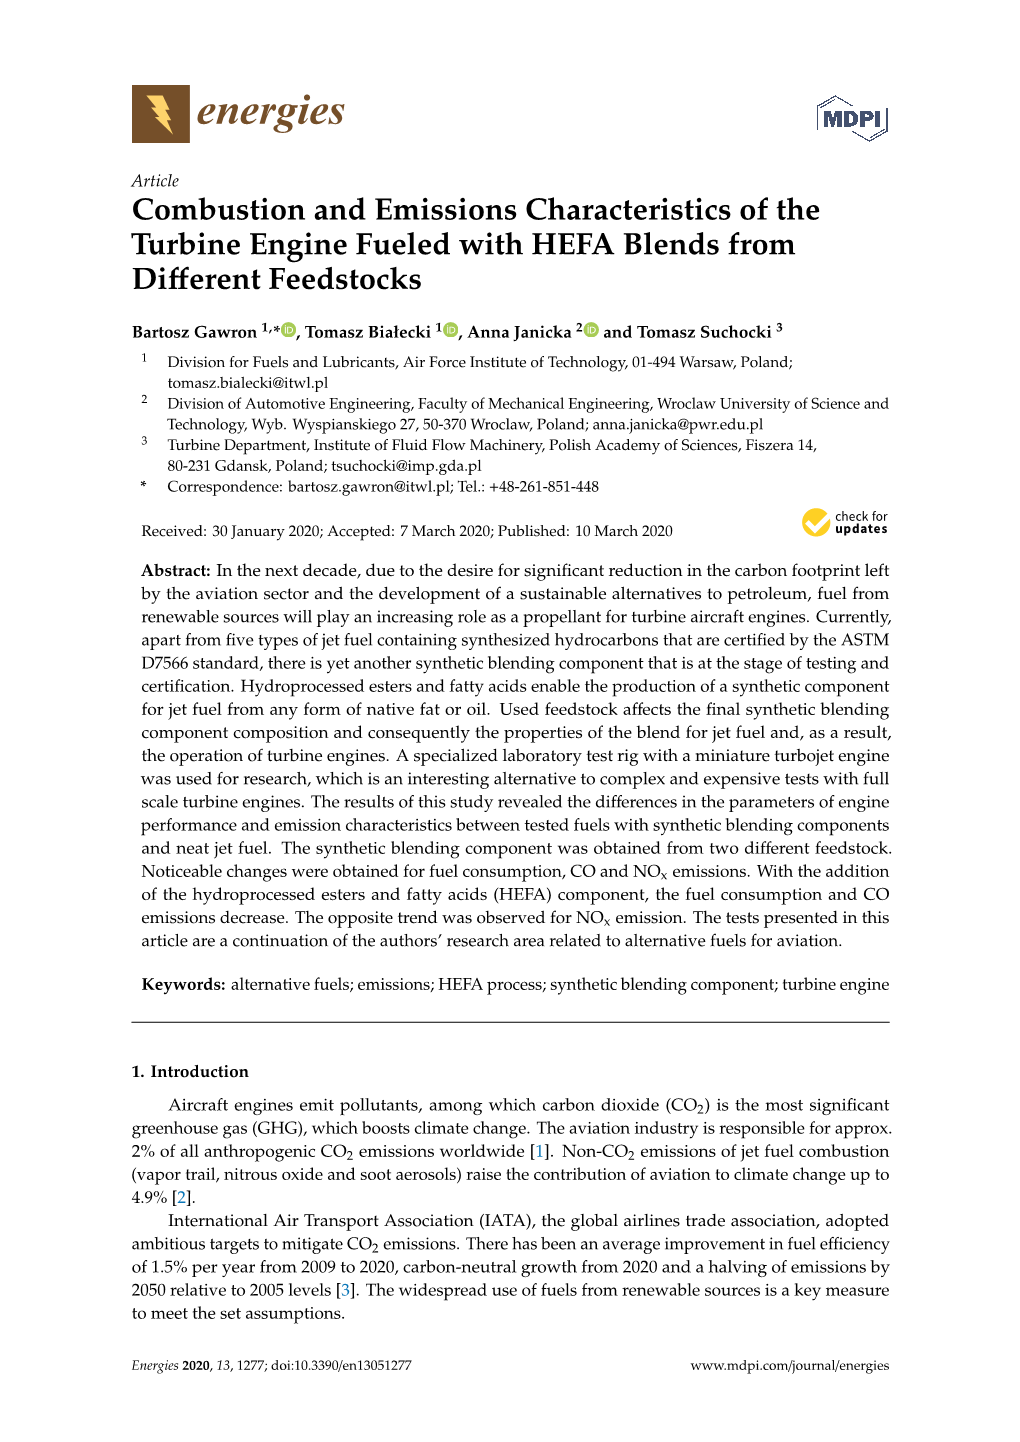 Combustion and Emissions Characteristics of the Turbine Engine Fueled with HEFA Blends from Diﬀerent Feedstocks